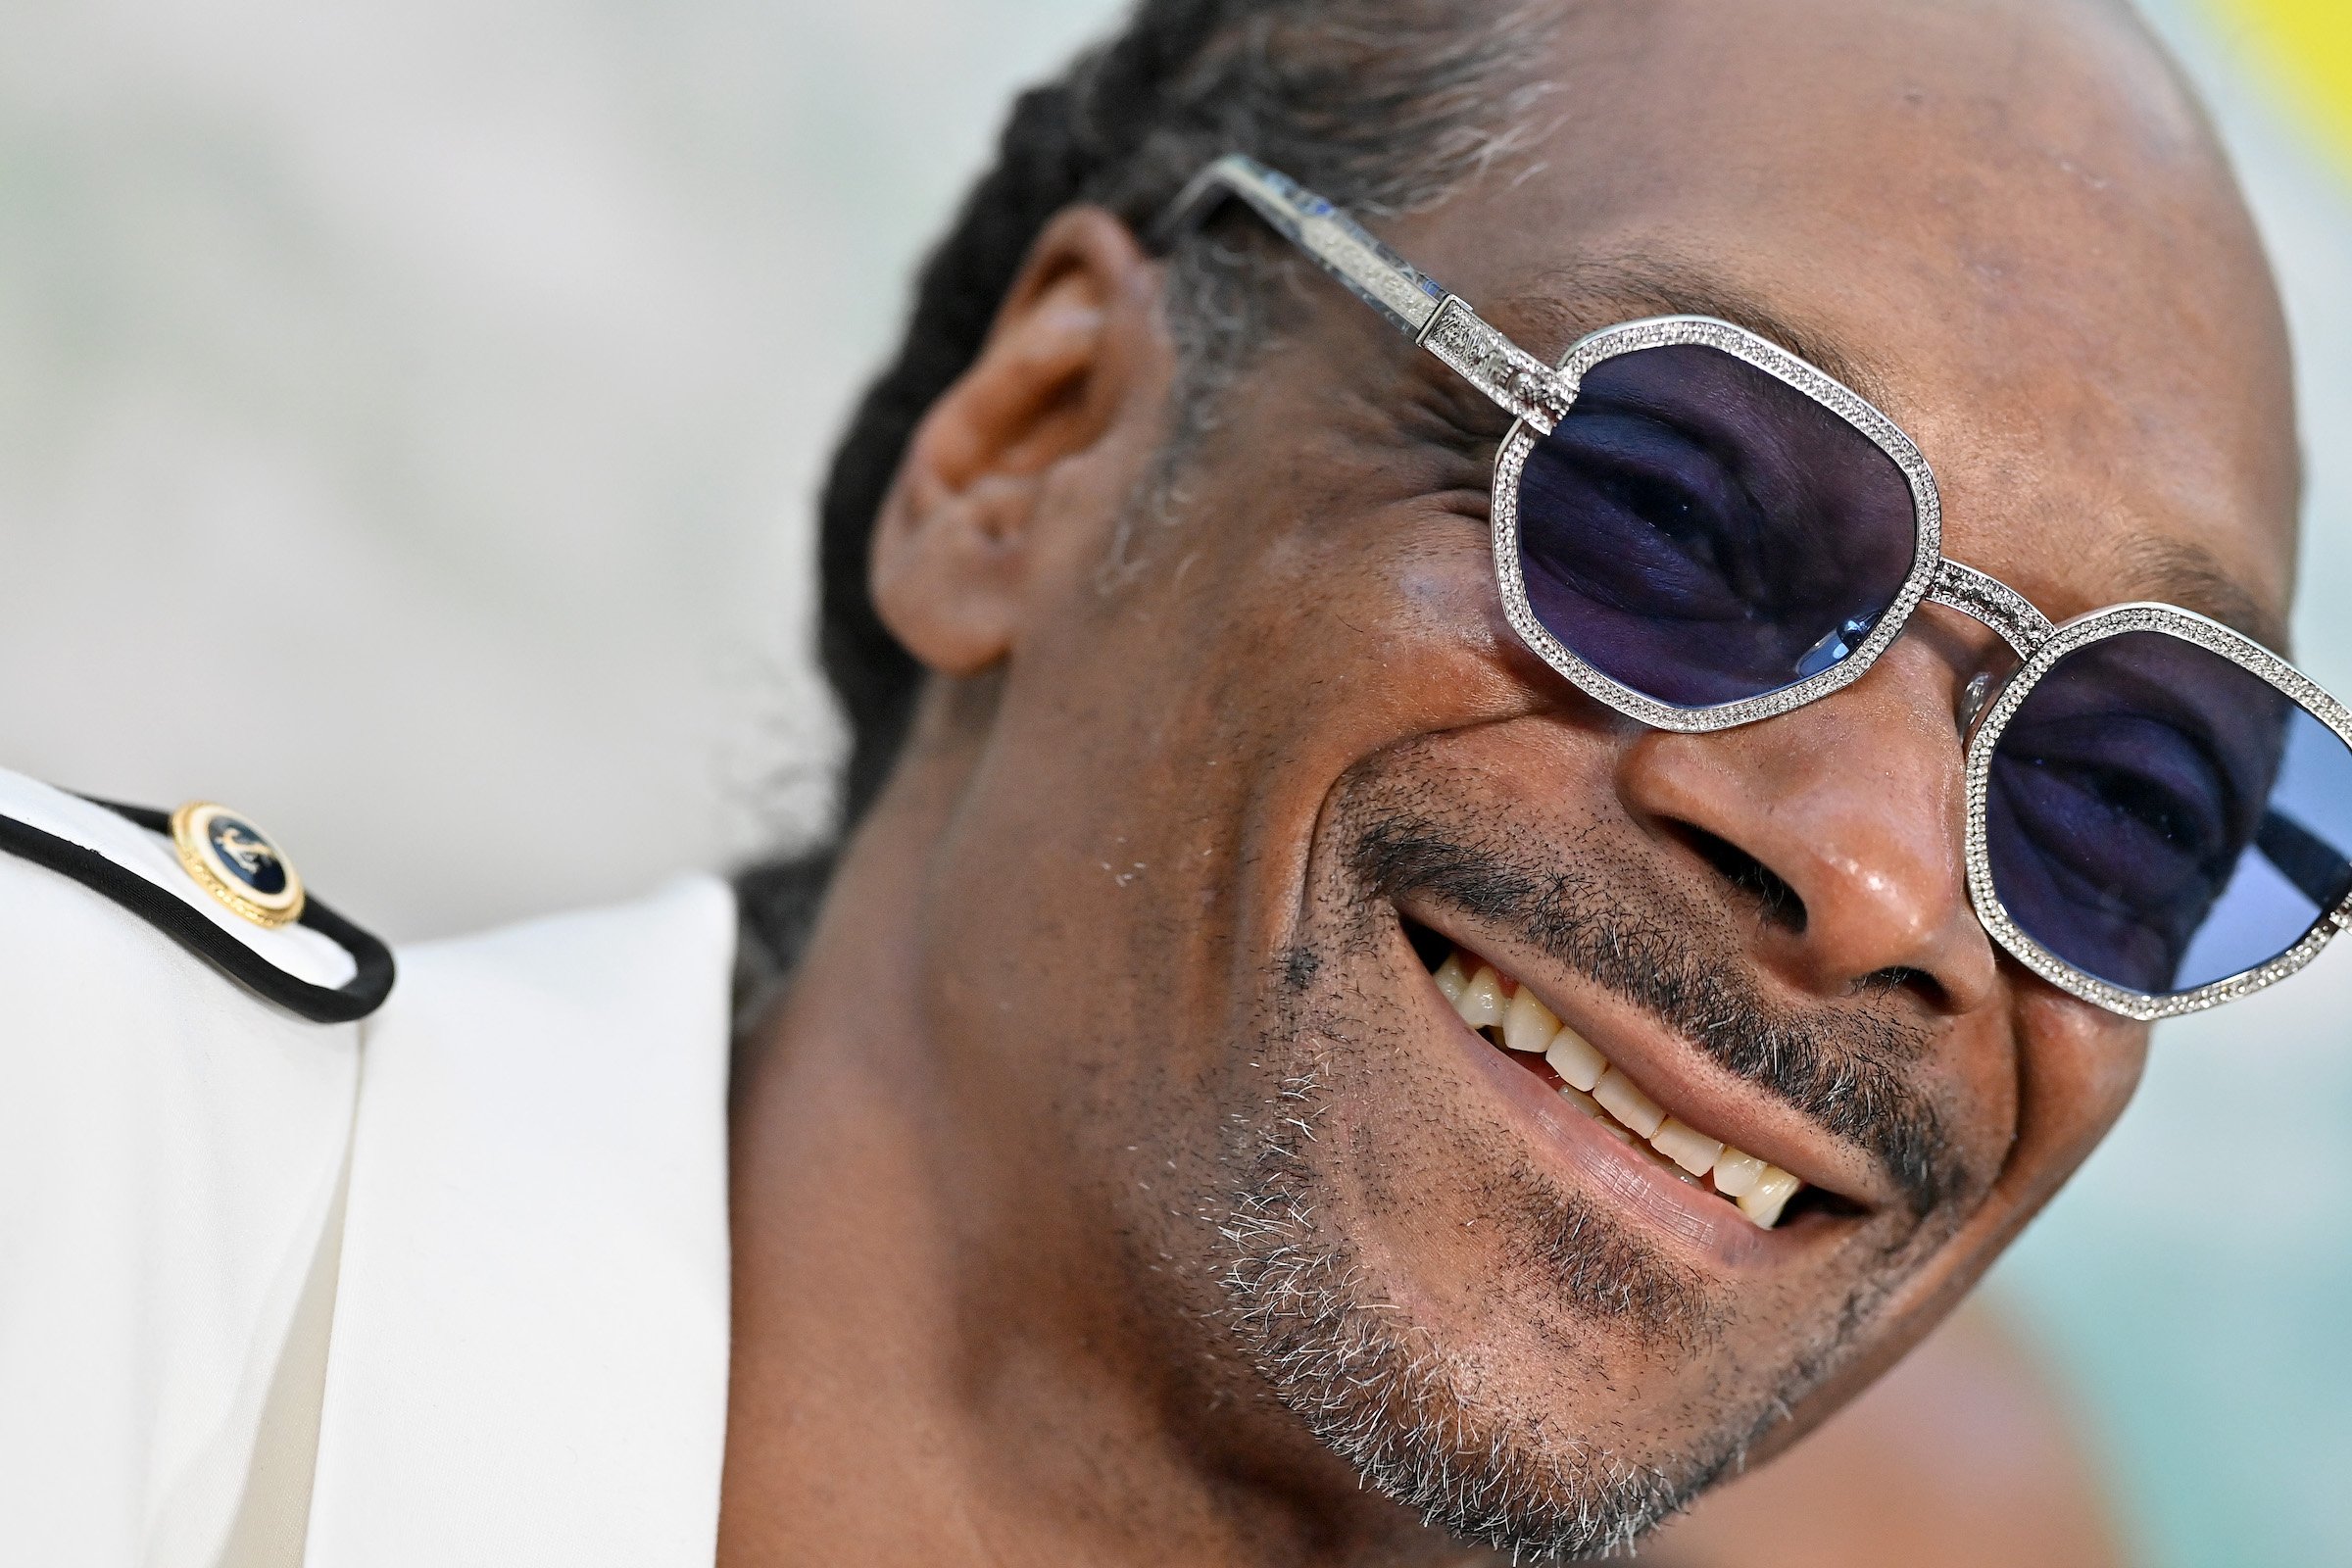 Snoop Dogg, who admitted he was 'out-gangstered' by Dionne Warwick, smiling for a photo